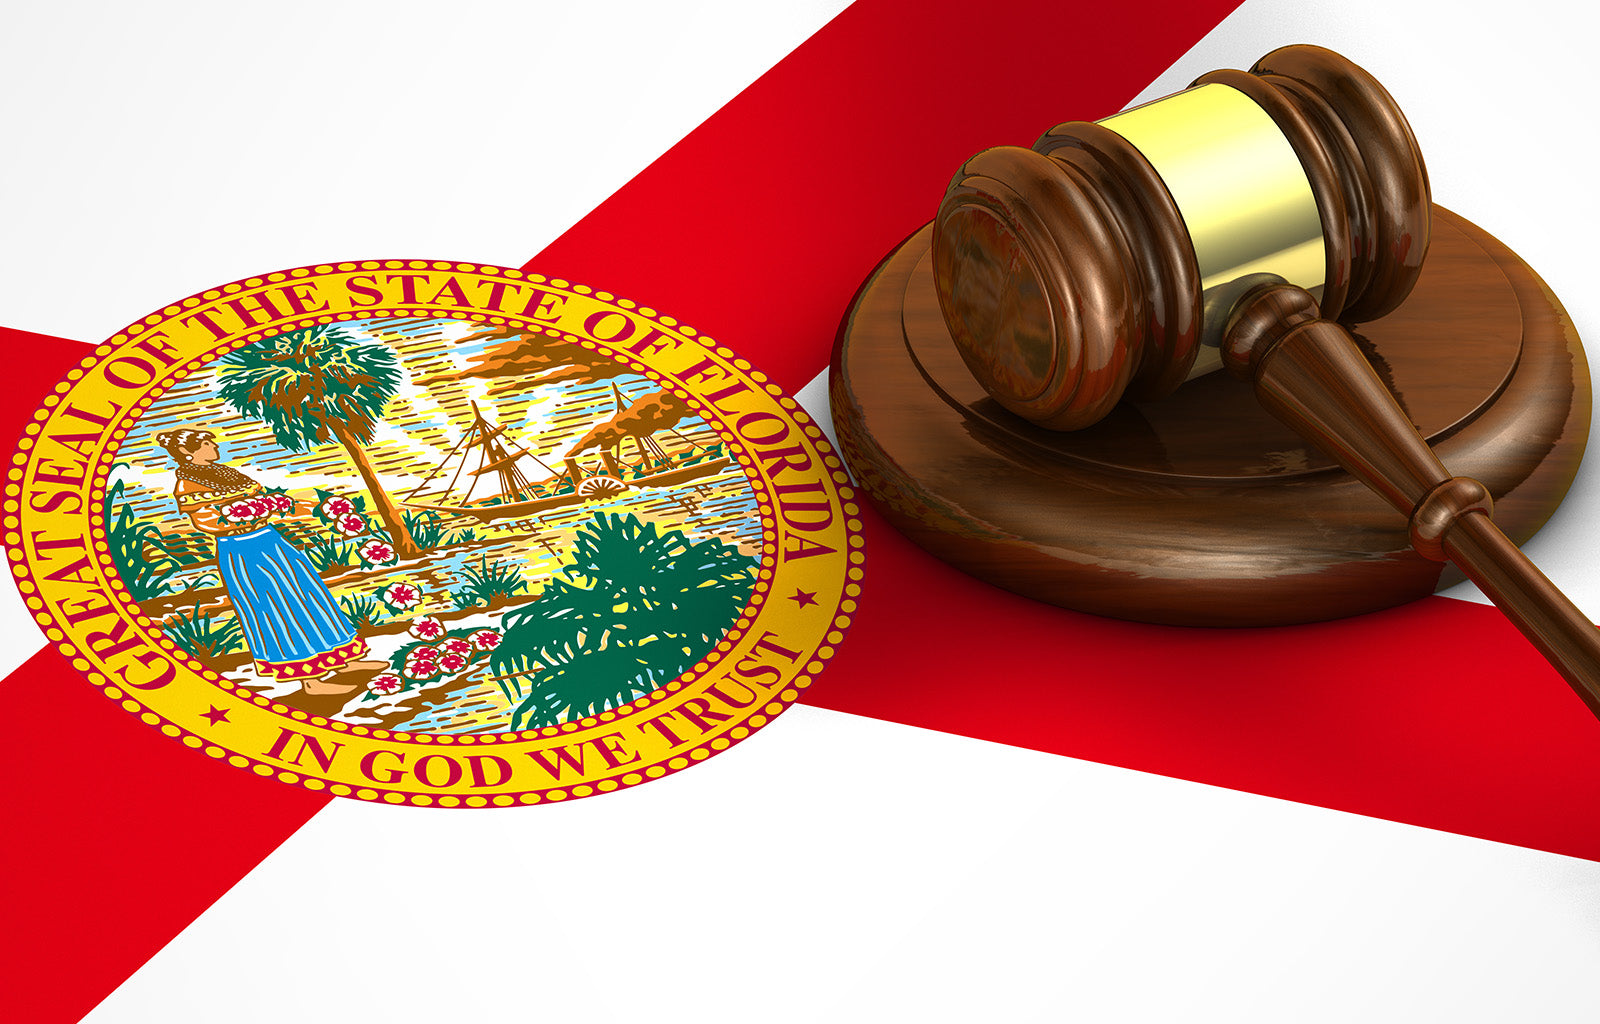 Featured image depicting the Great Seal of the State of Florida, sitting next to a judges gavel - Is Kratom Legal in Florida?